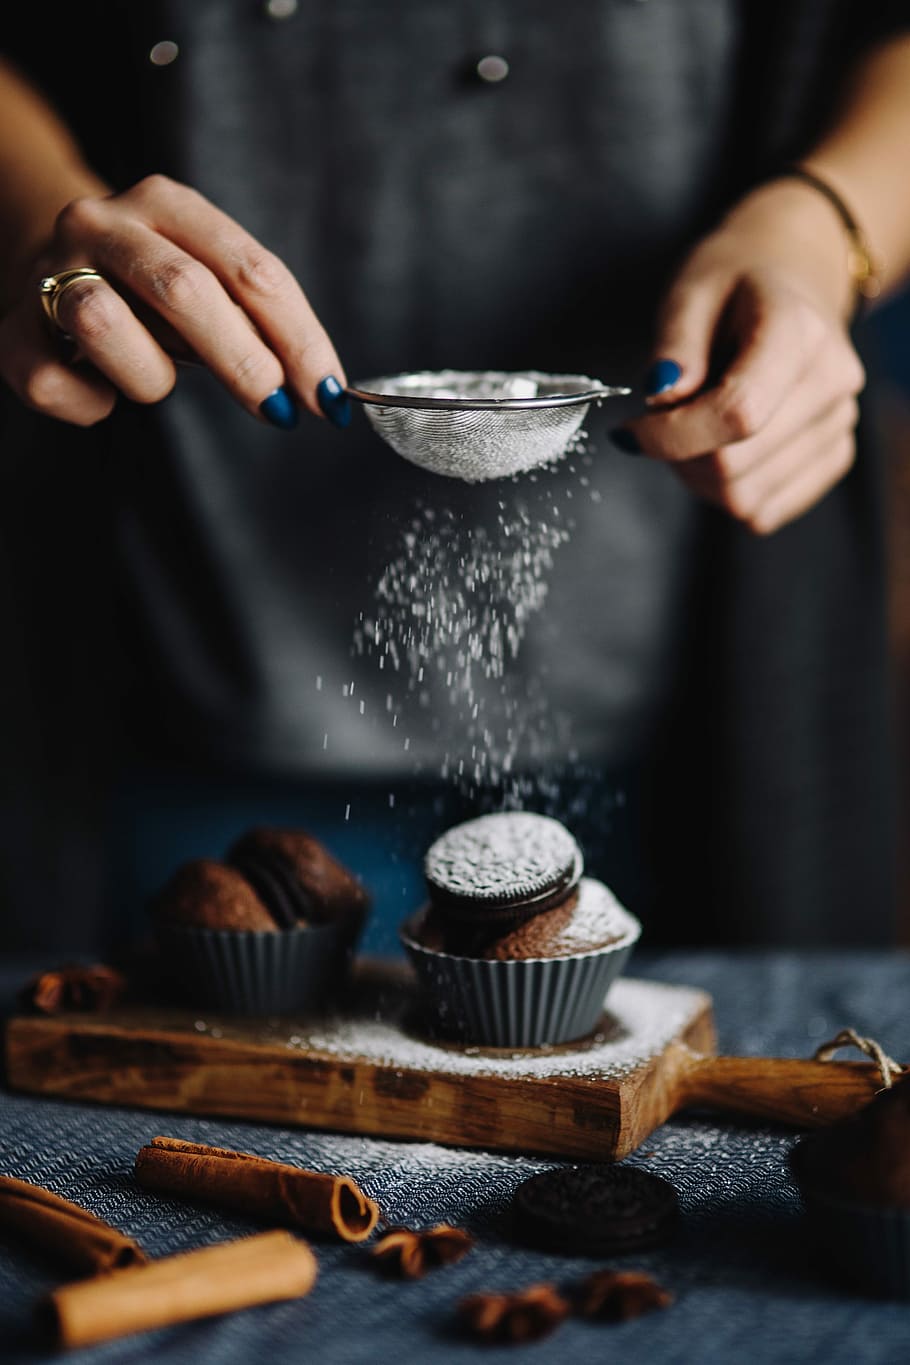 HD wallpaper: Oreo Muffins, cup, cake, food, homemade, cook, delicious, bakery